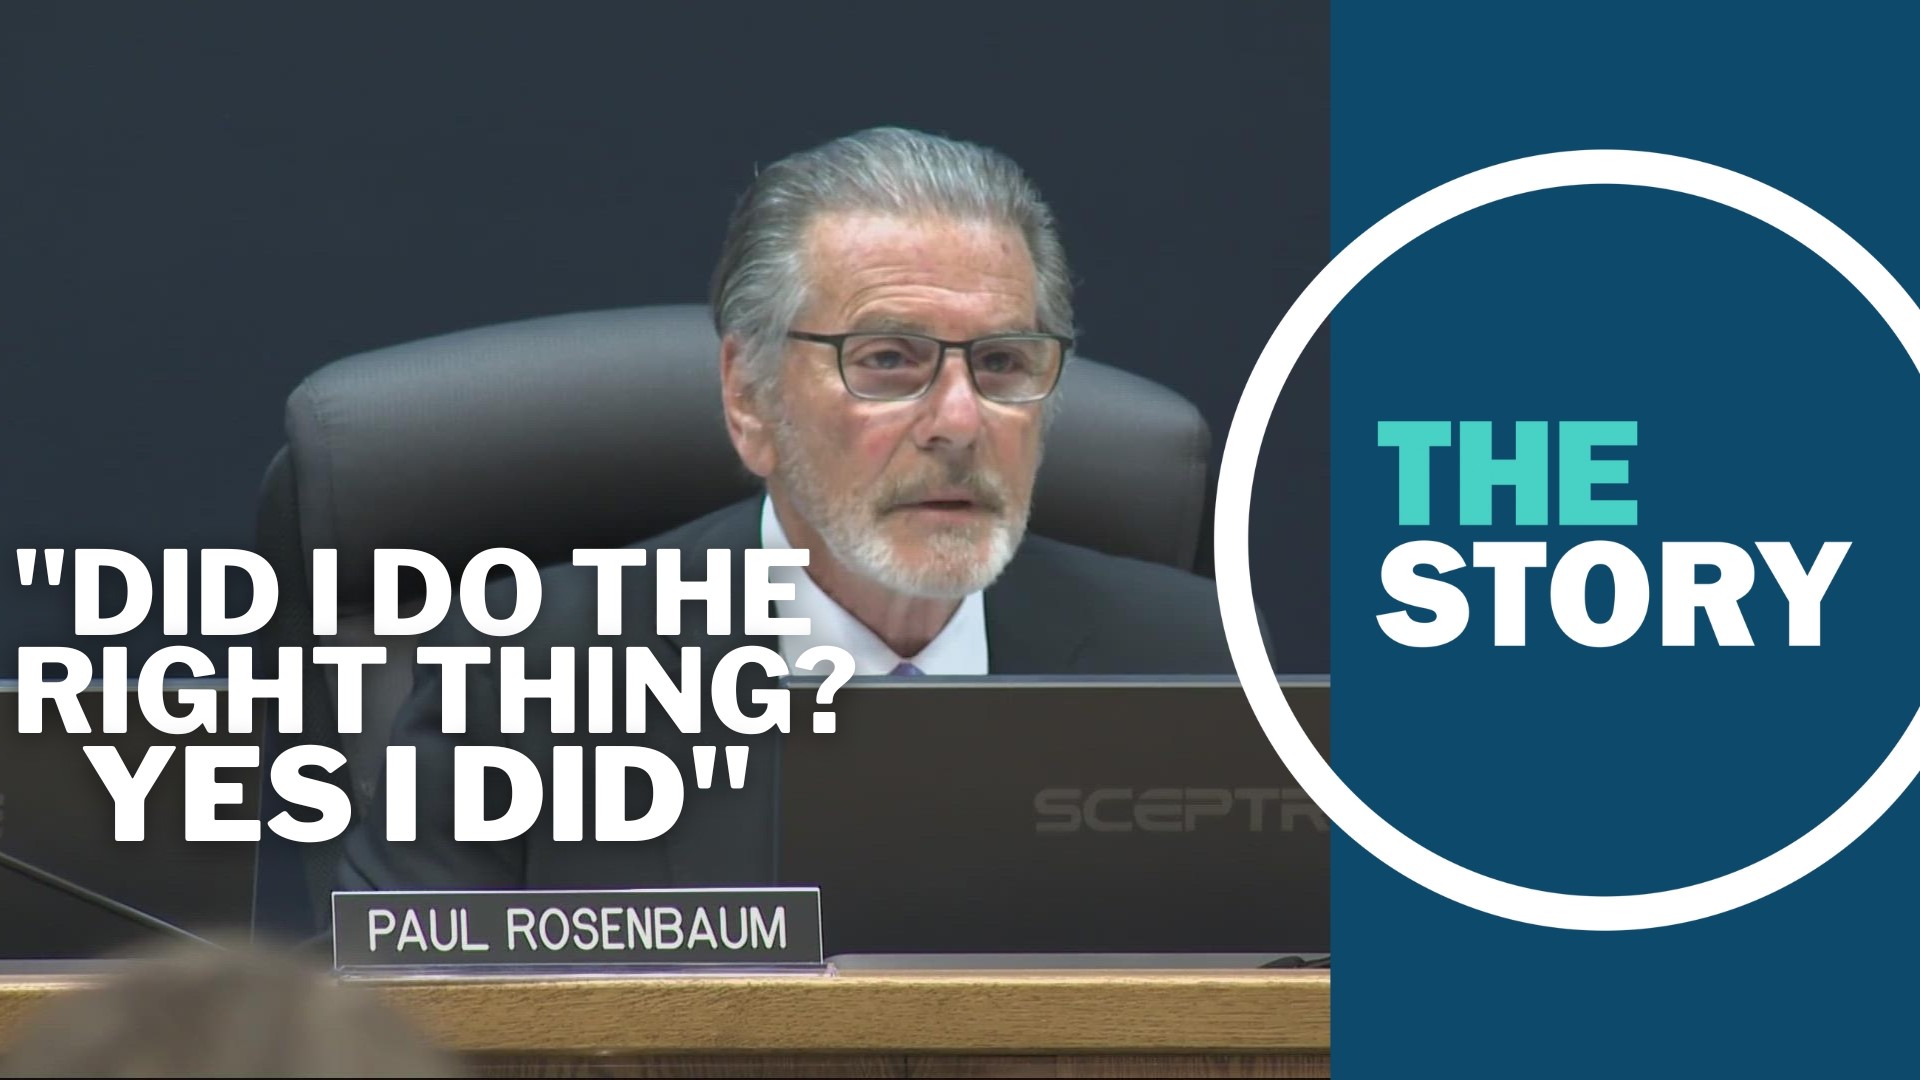 Chairman Paul Rosenbaum stressed that the results of an internal investigation he learned about Sept. 8 were "confidential" and should not have been made public.